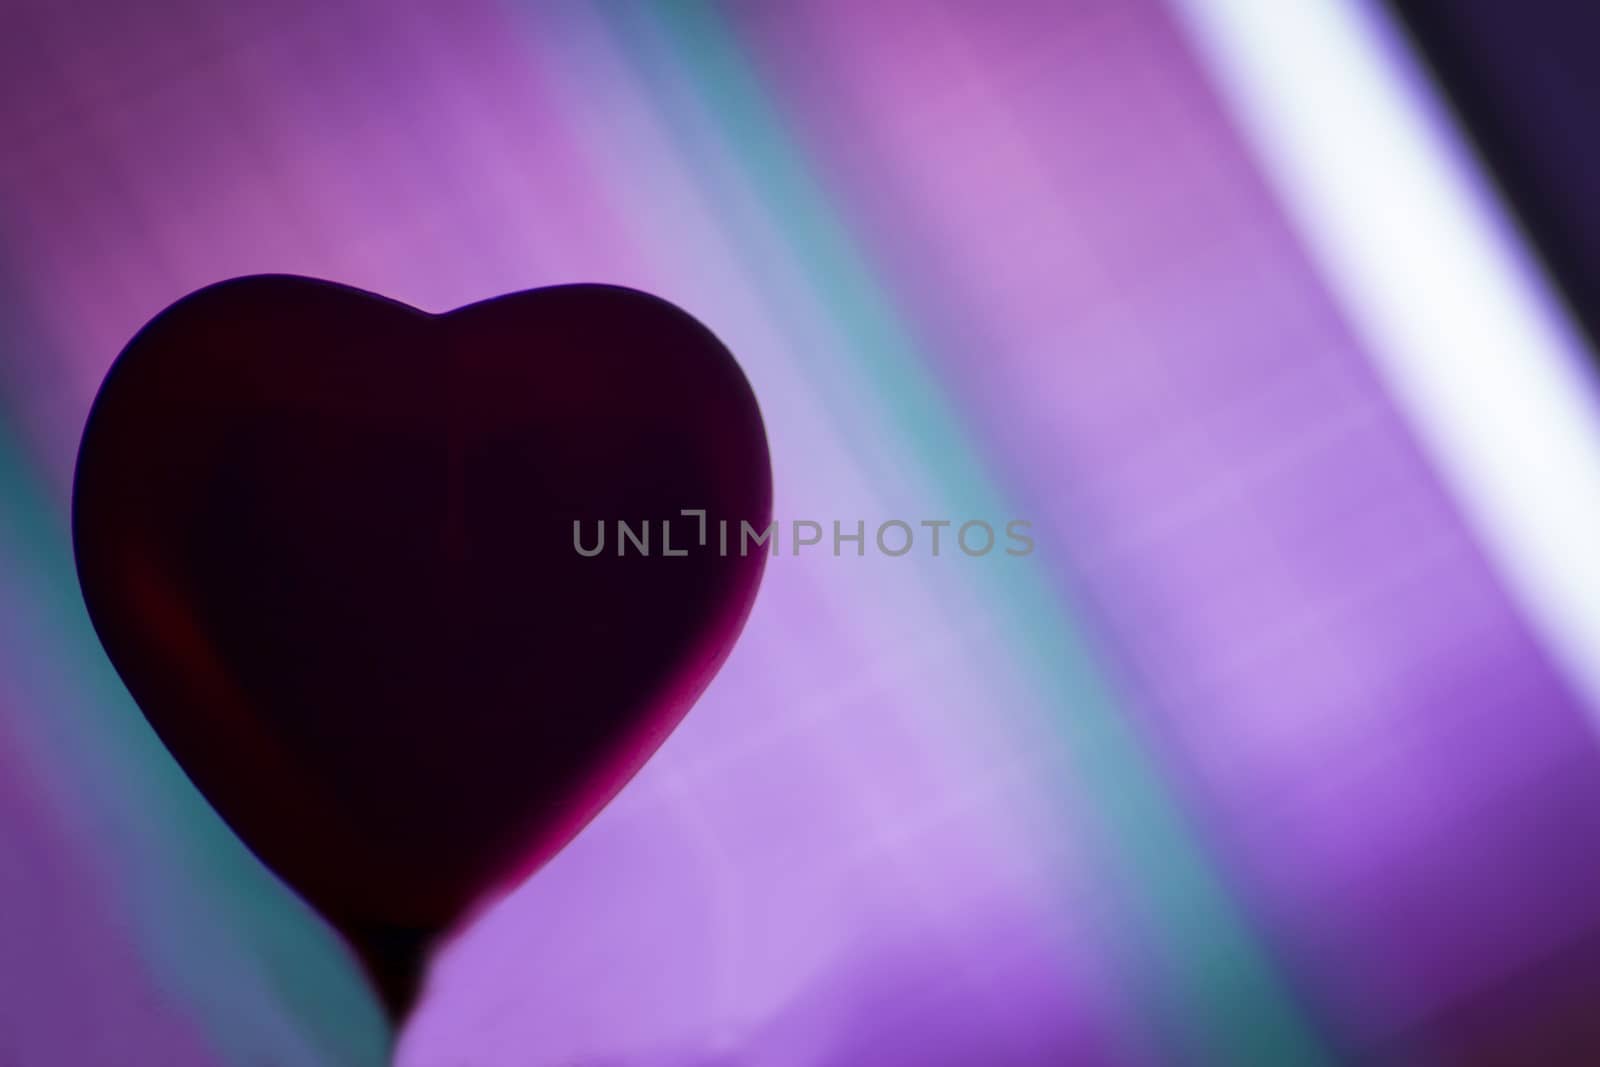 Heart Silhouette. Background in several bright colors.